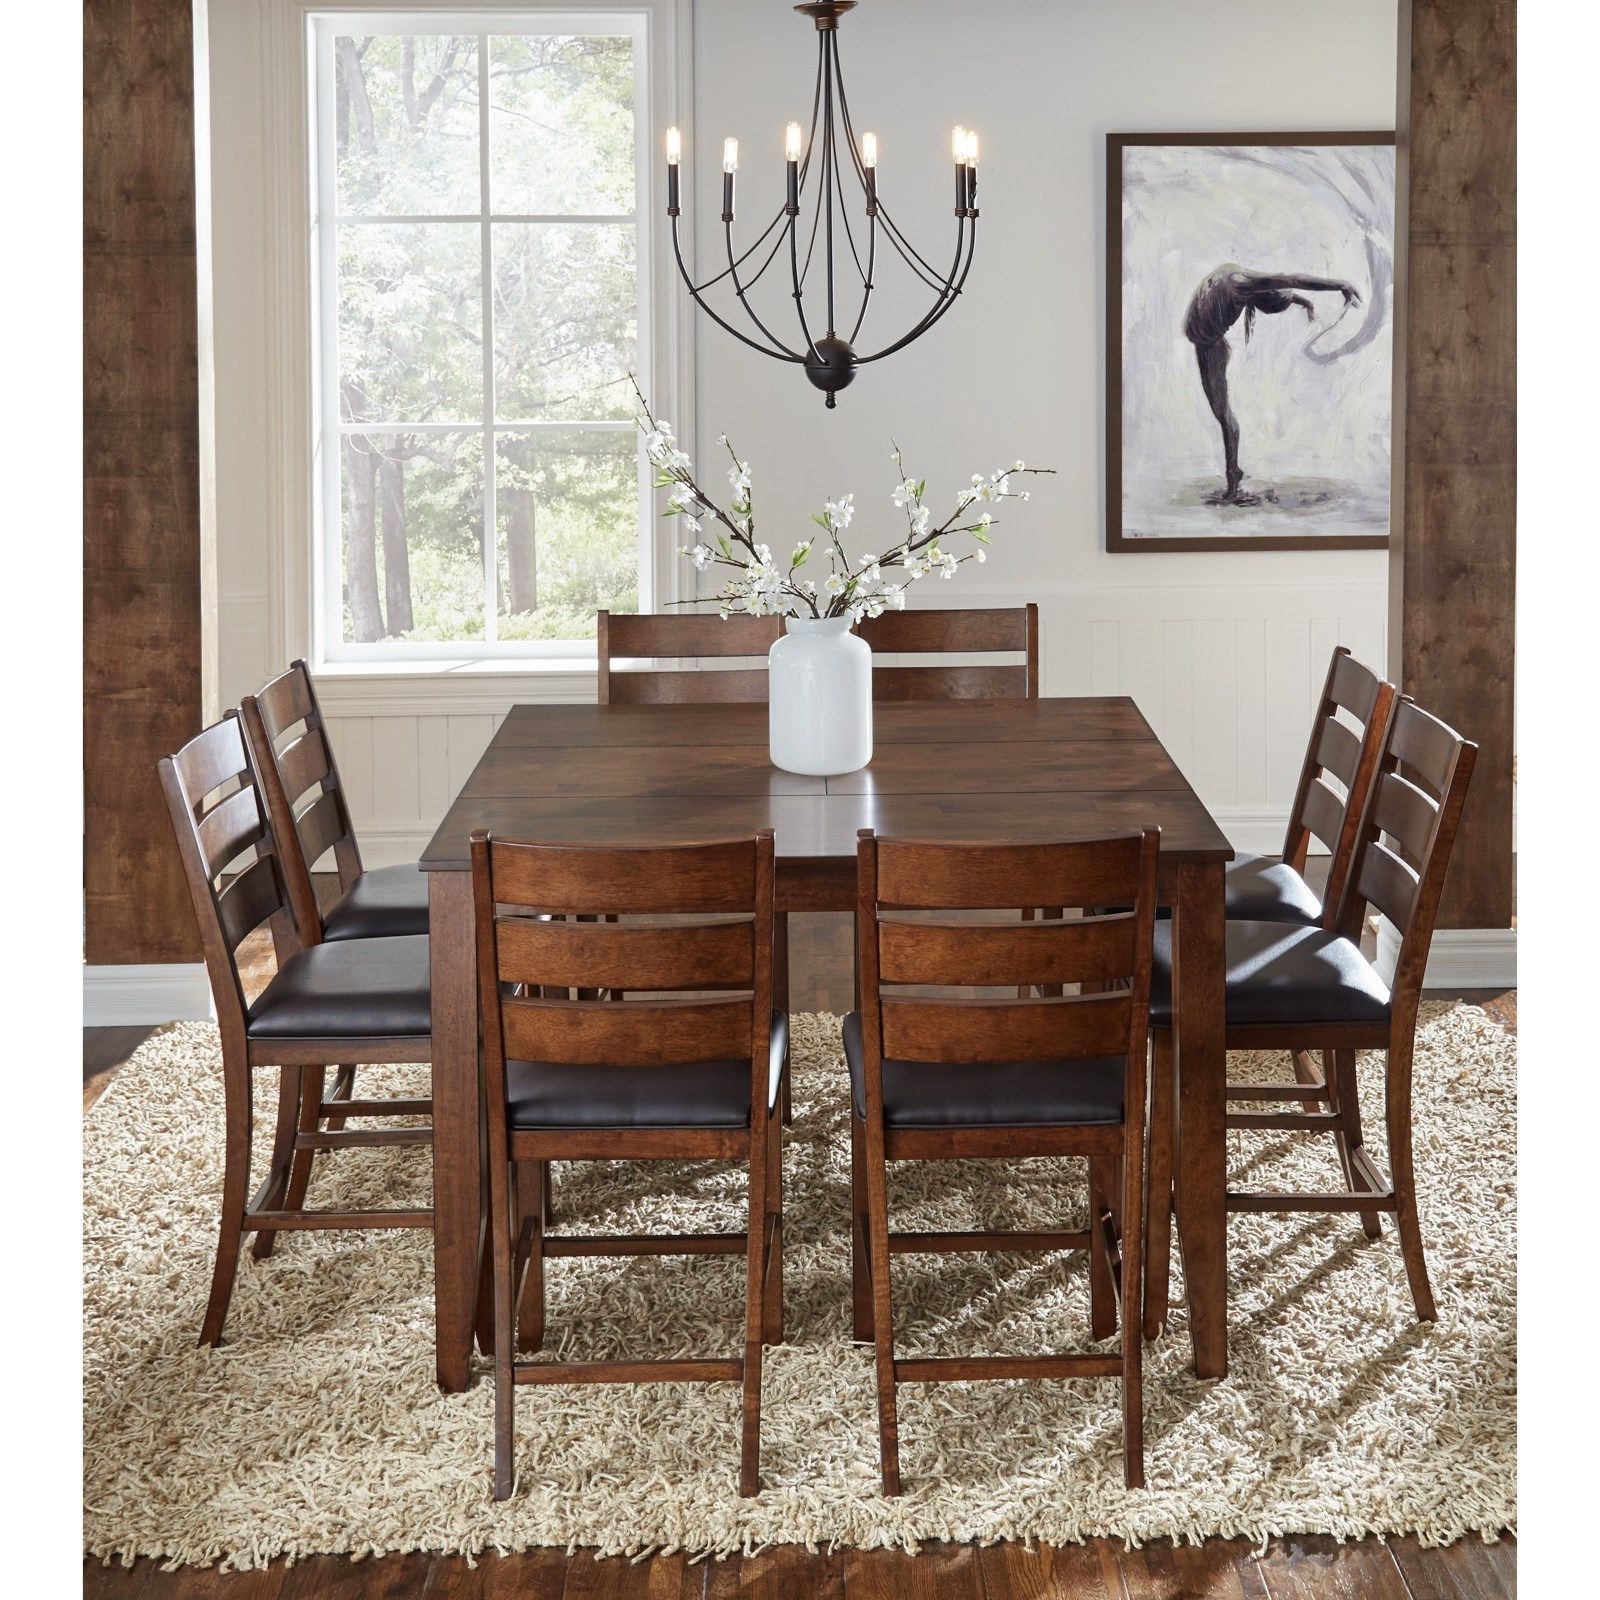 Aamerica Mason Rectangular Butterfly Leaf Dining Table For Most Current Warnock Butterfly Leaf Trestle Dining Tables (Gallery 20 of 20)